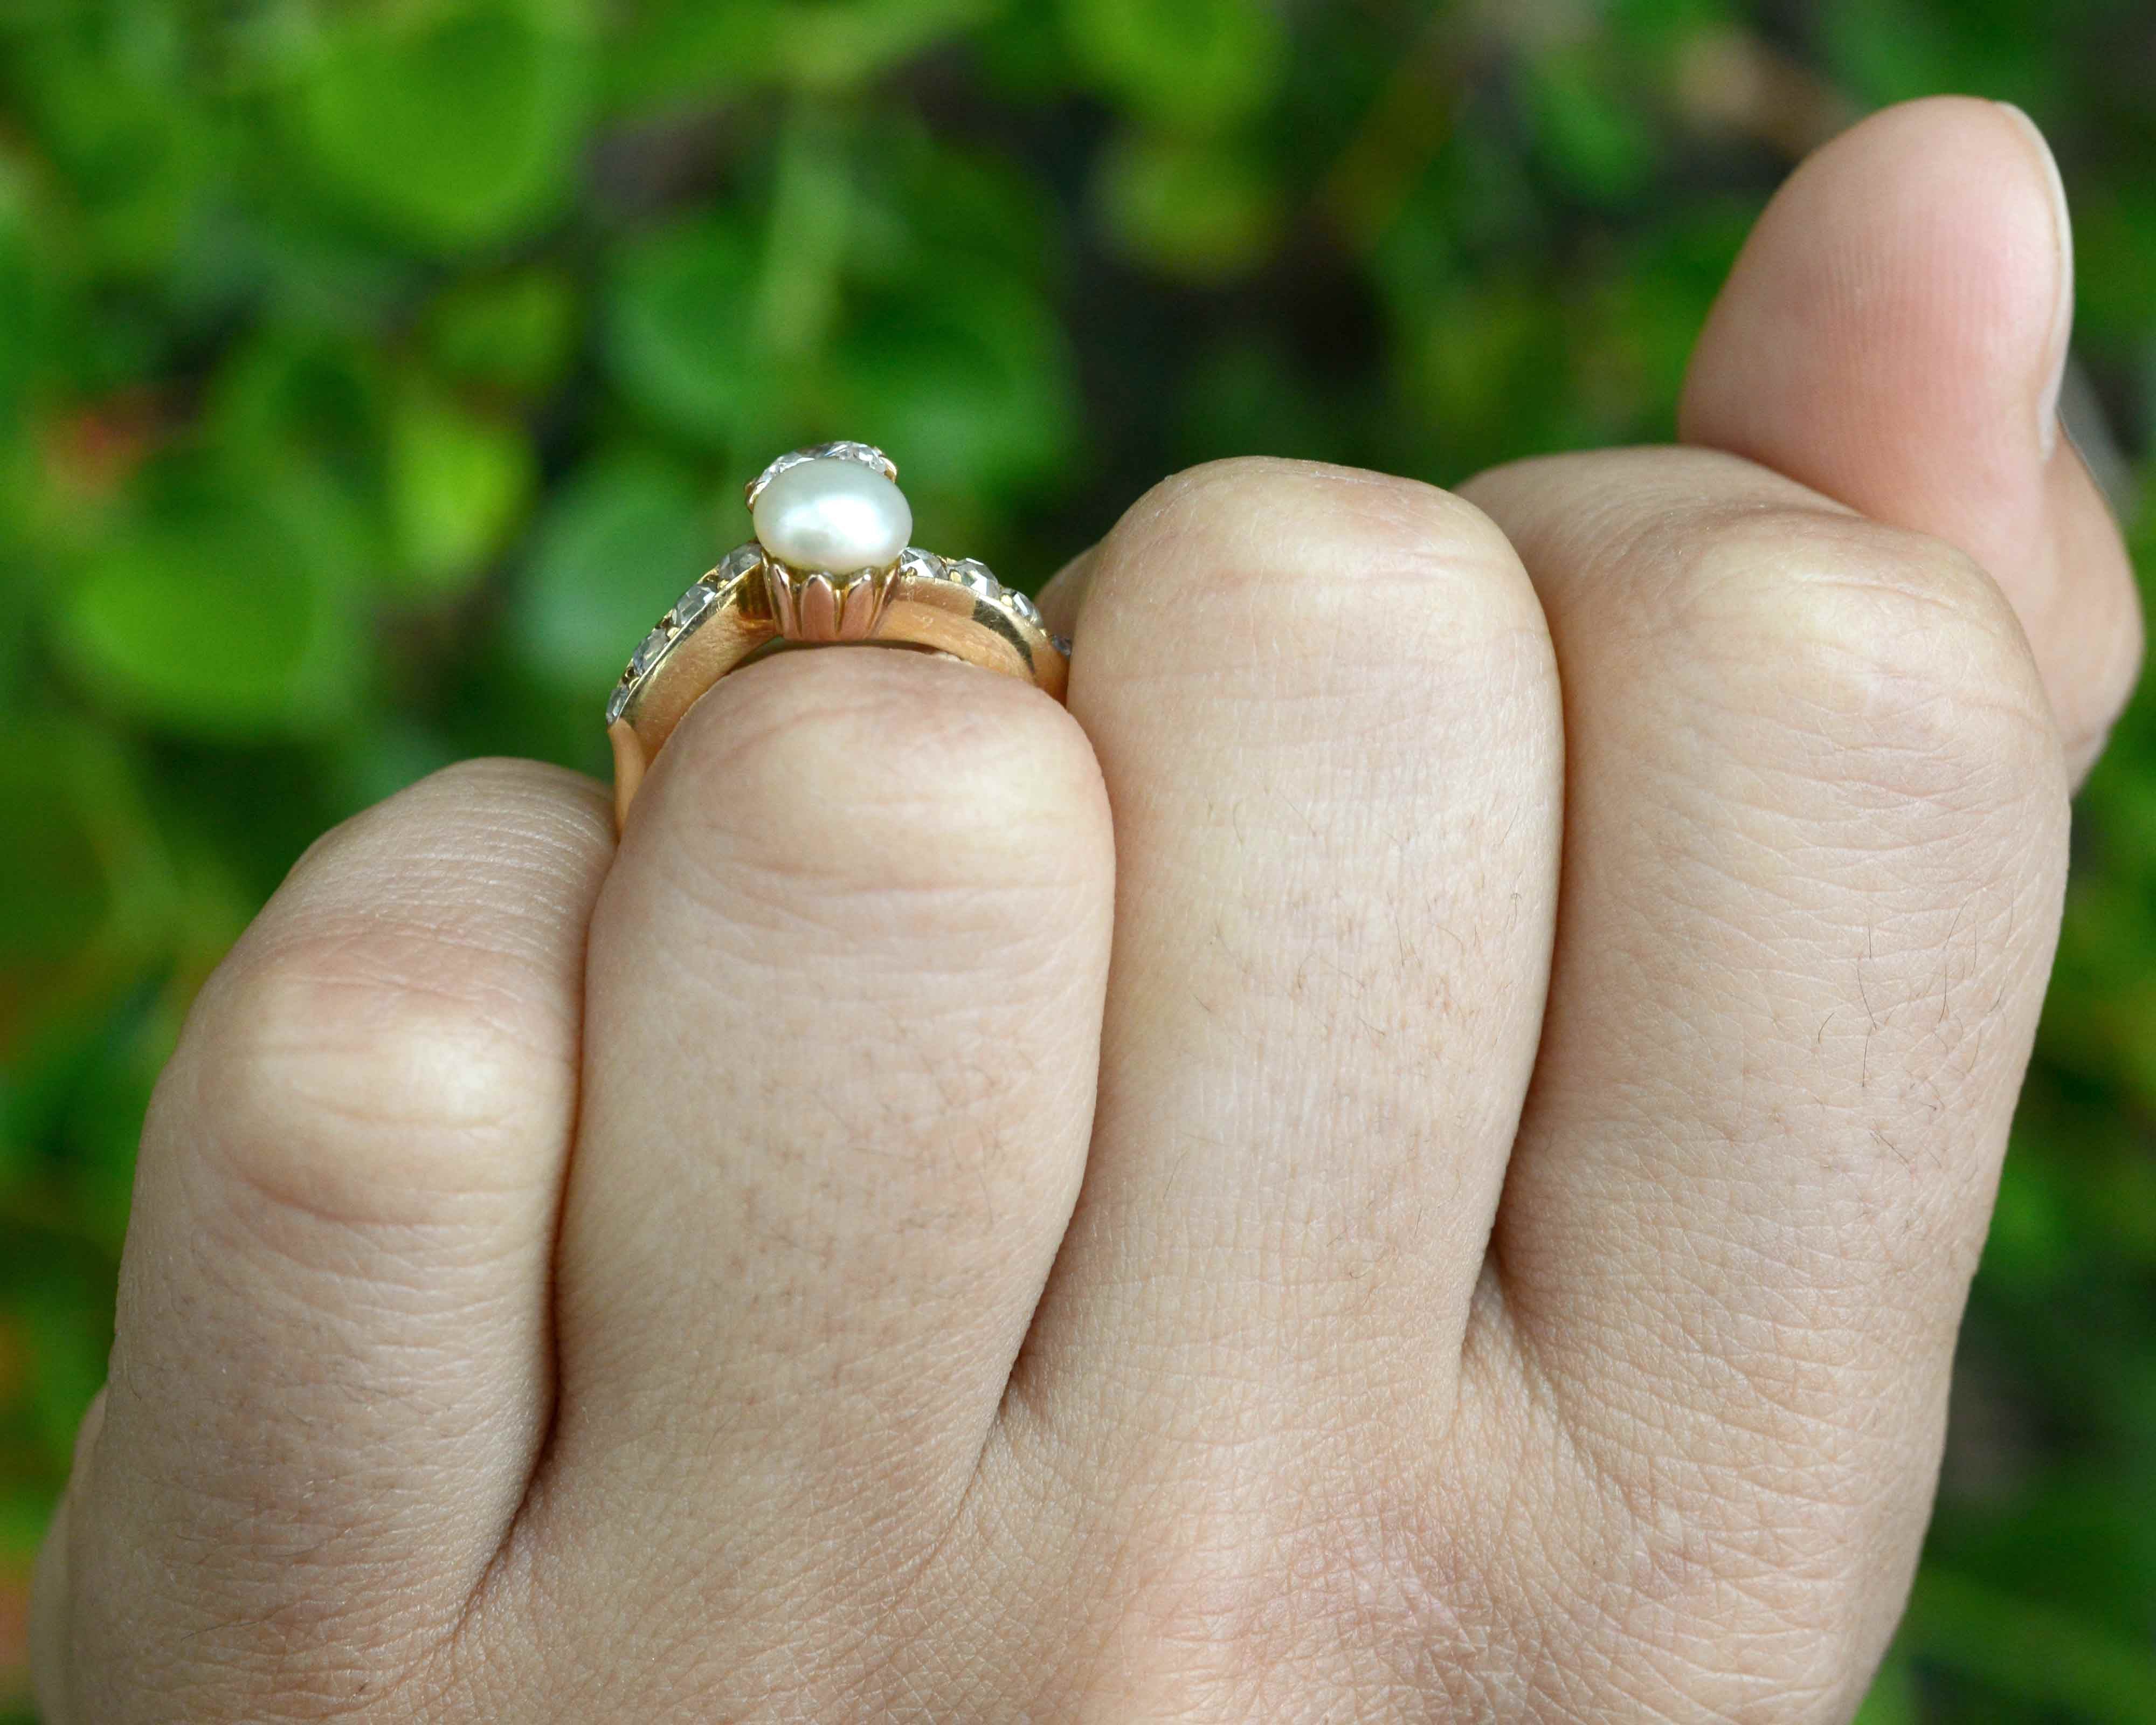 This gold solitaire ring features a pearl and diamonds.